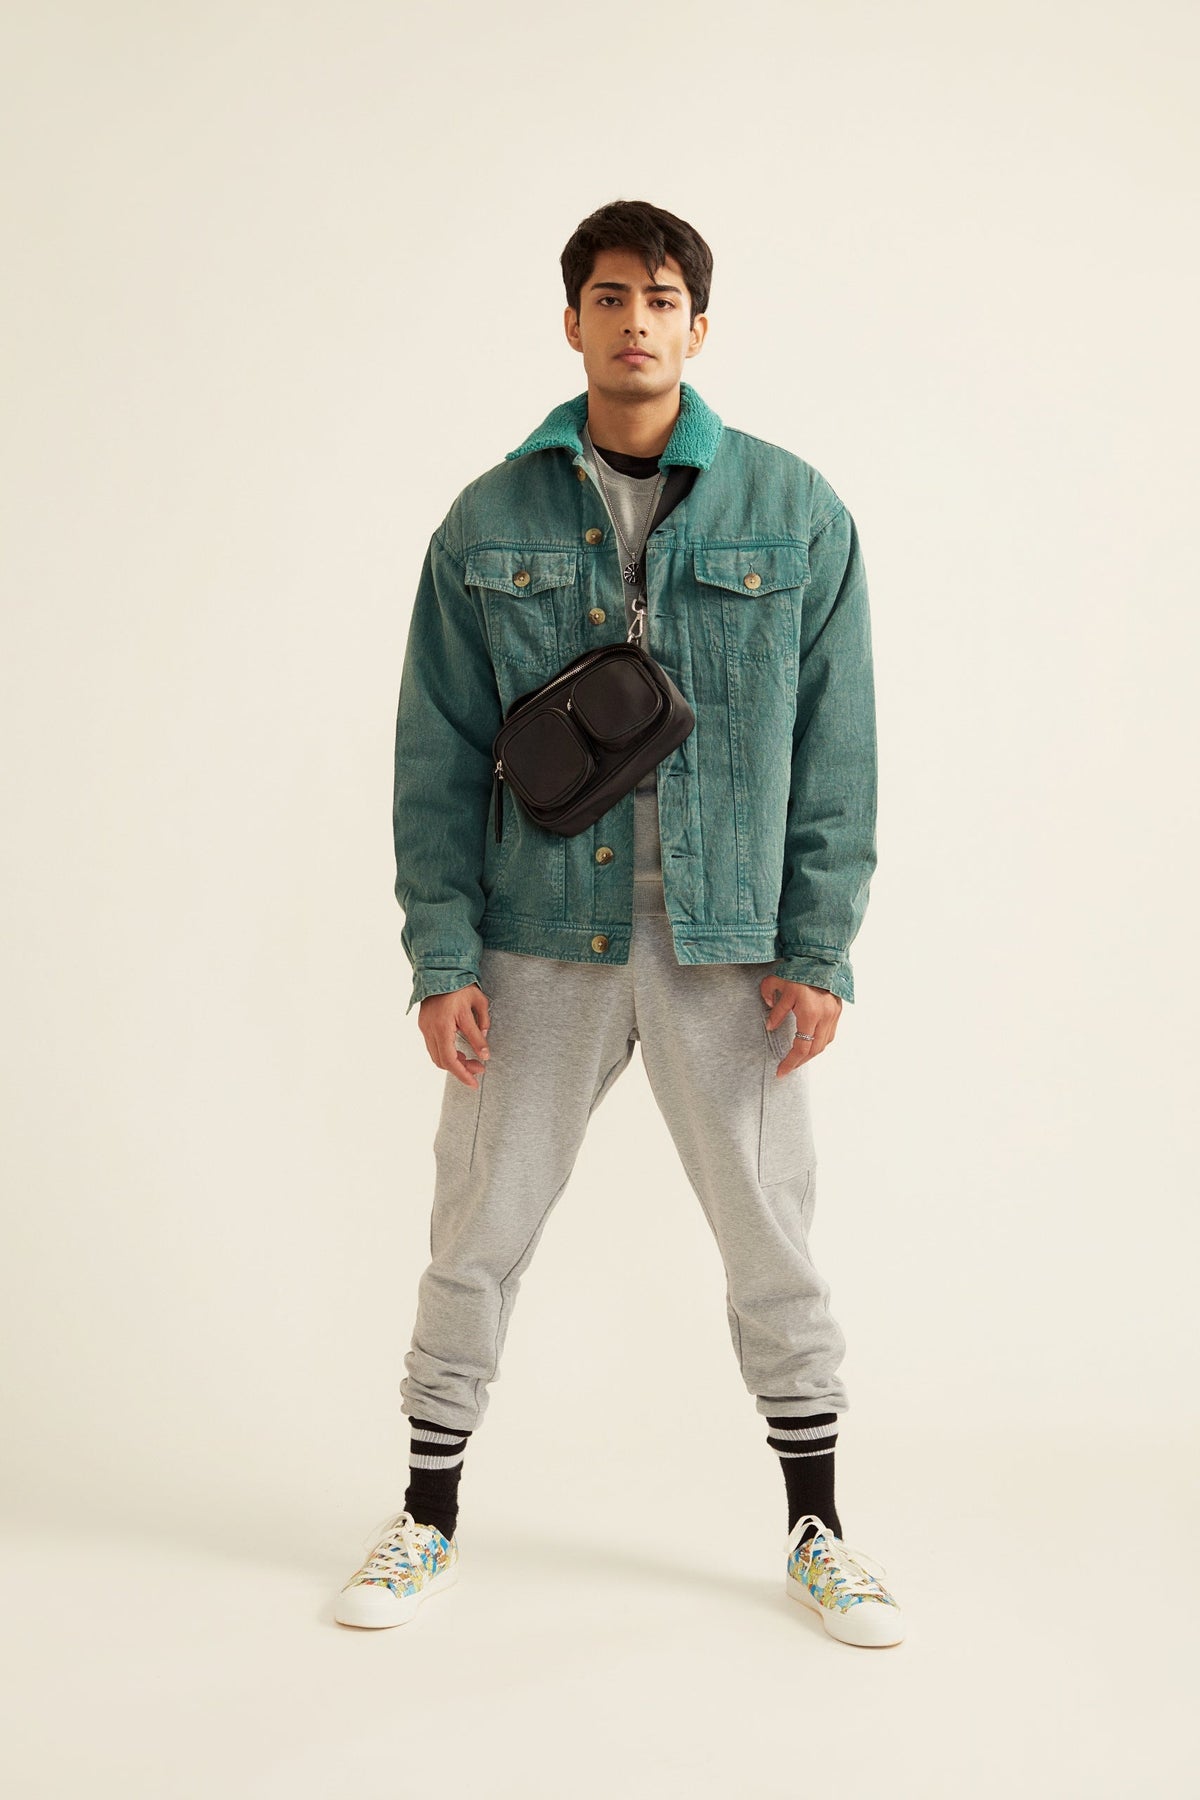 Green Acid Washed Twill Jacket with Faux Fur